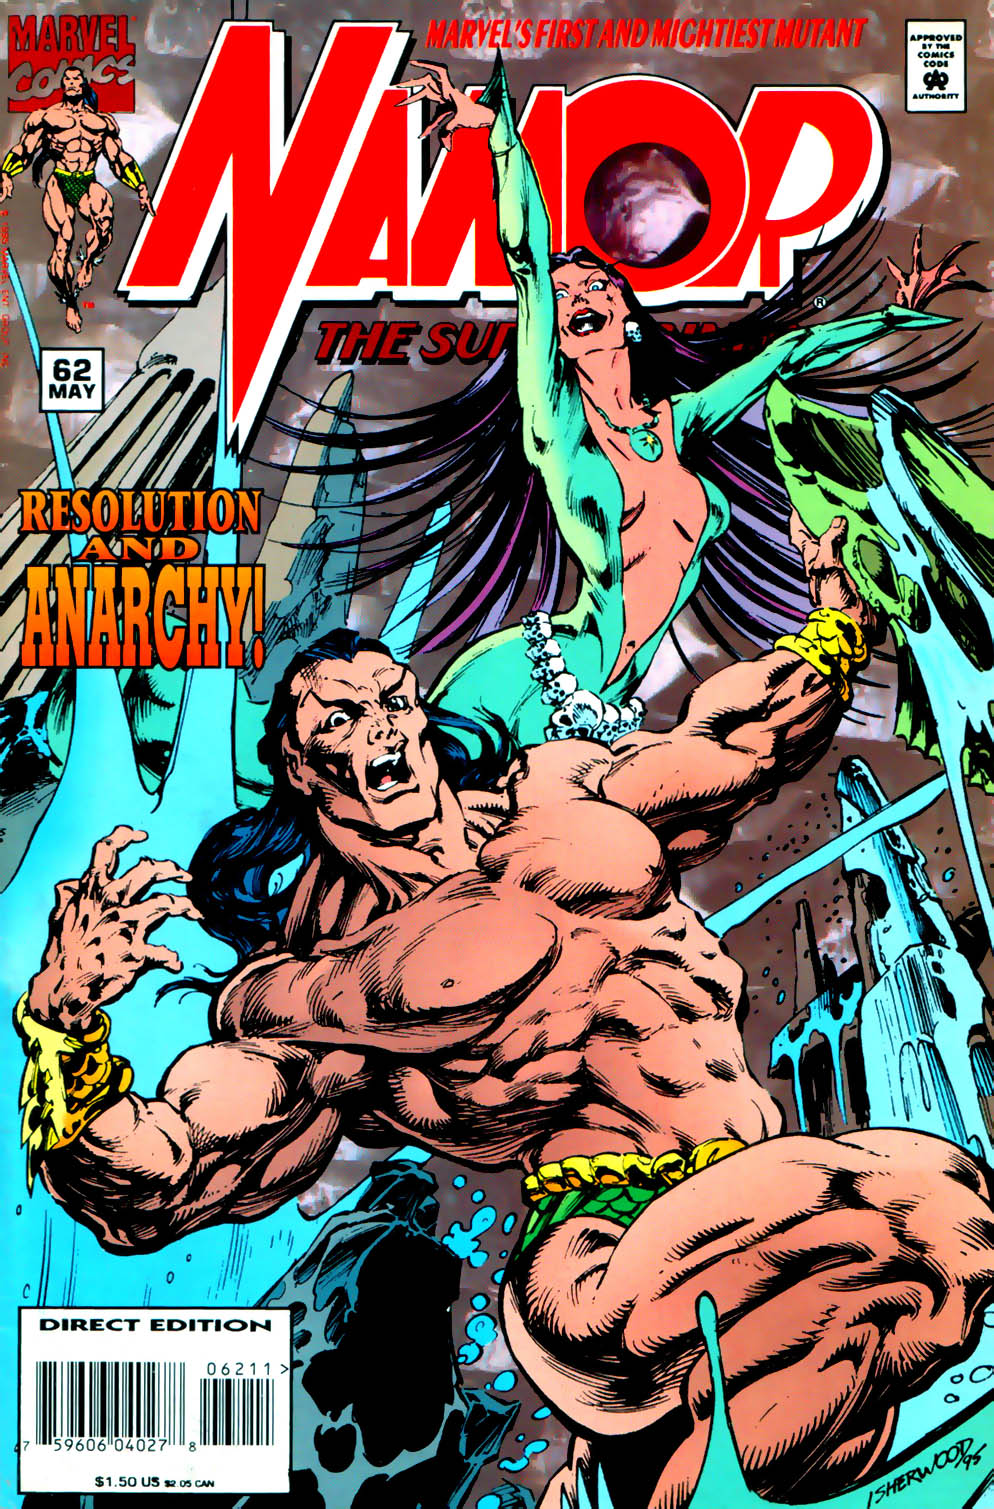 Read online Namor, The Sub-Mariner comic -  Issue #62 - 2